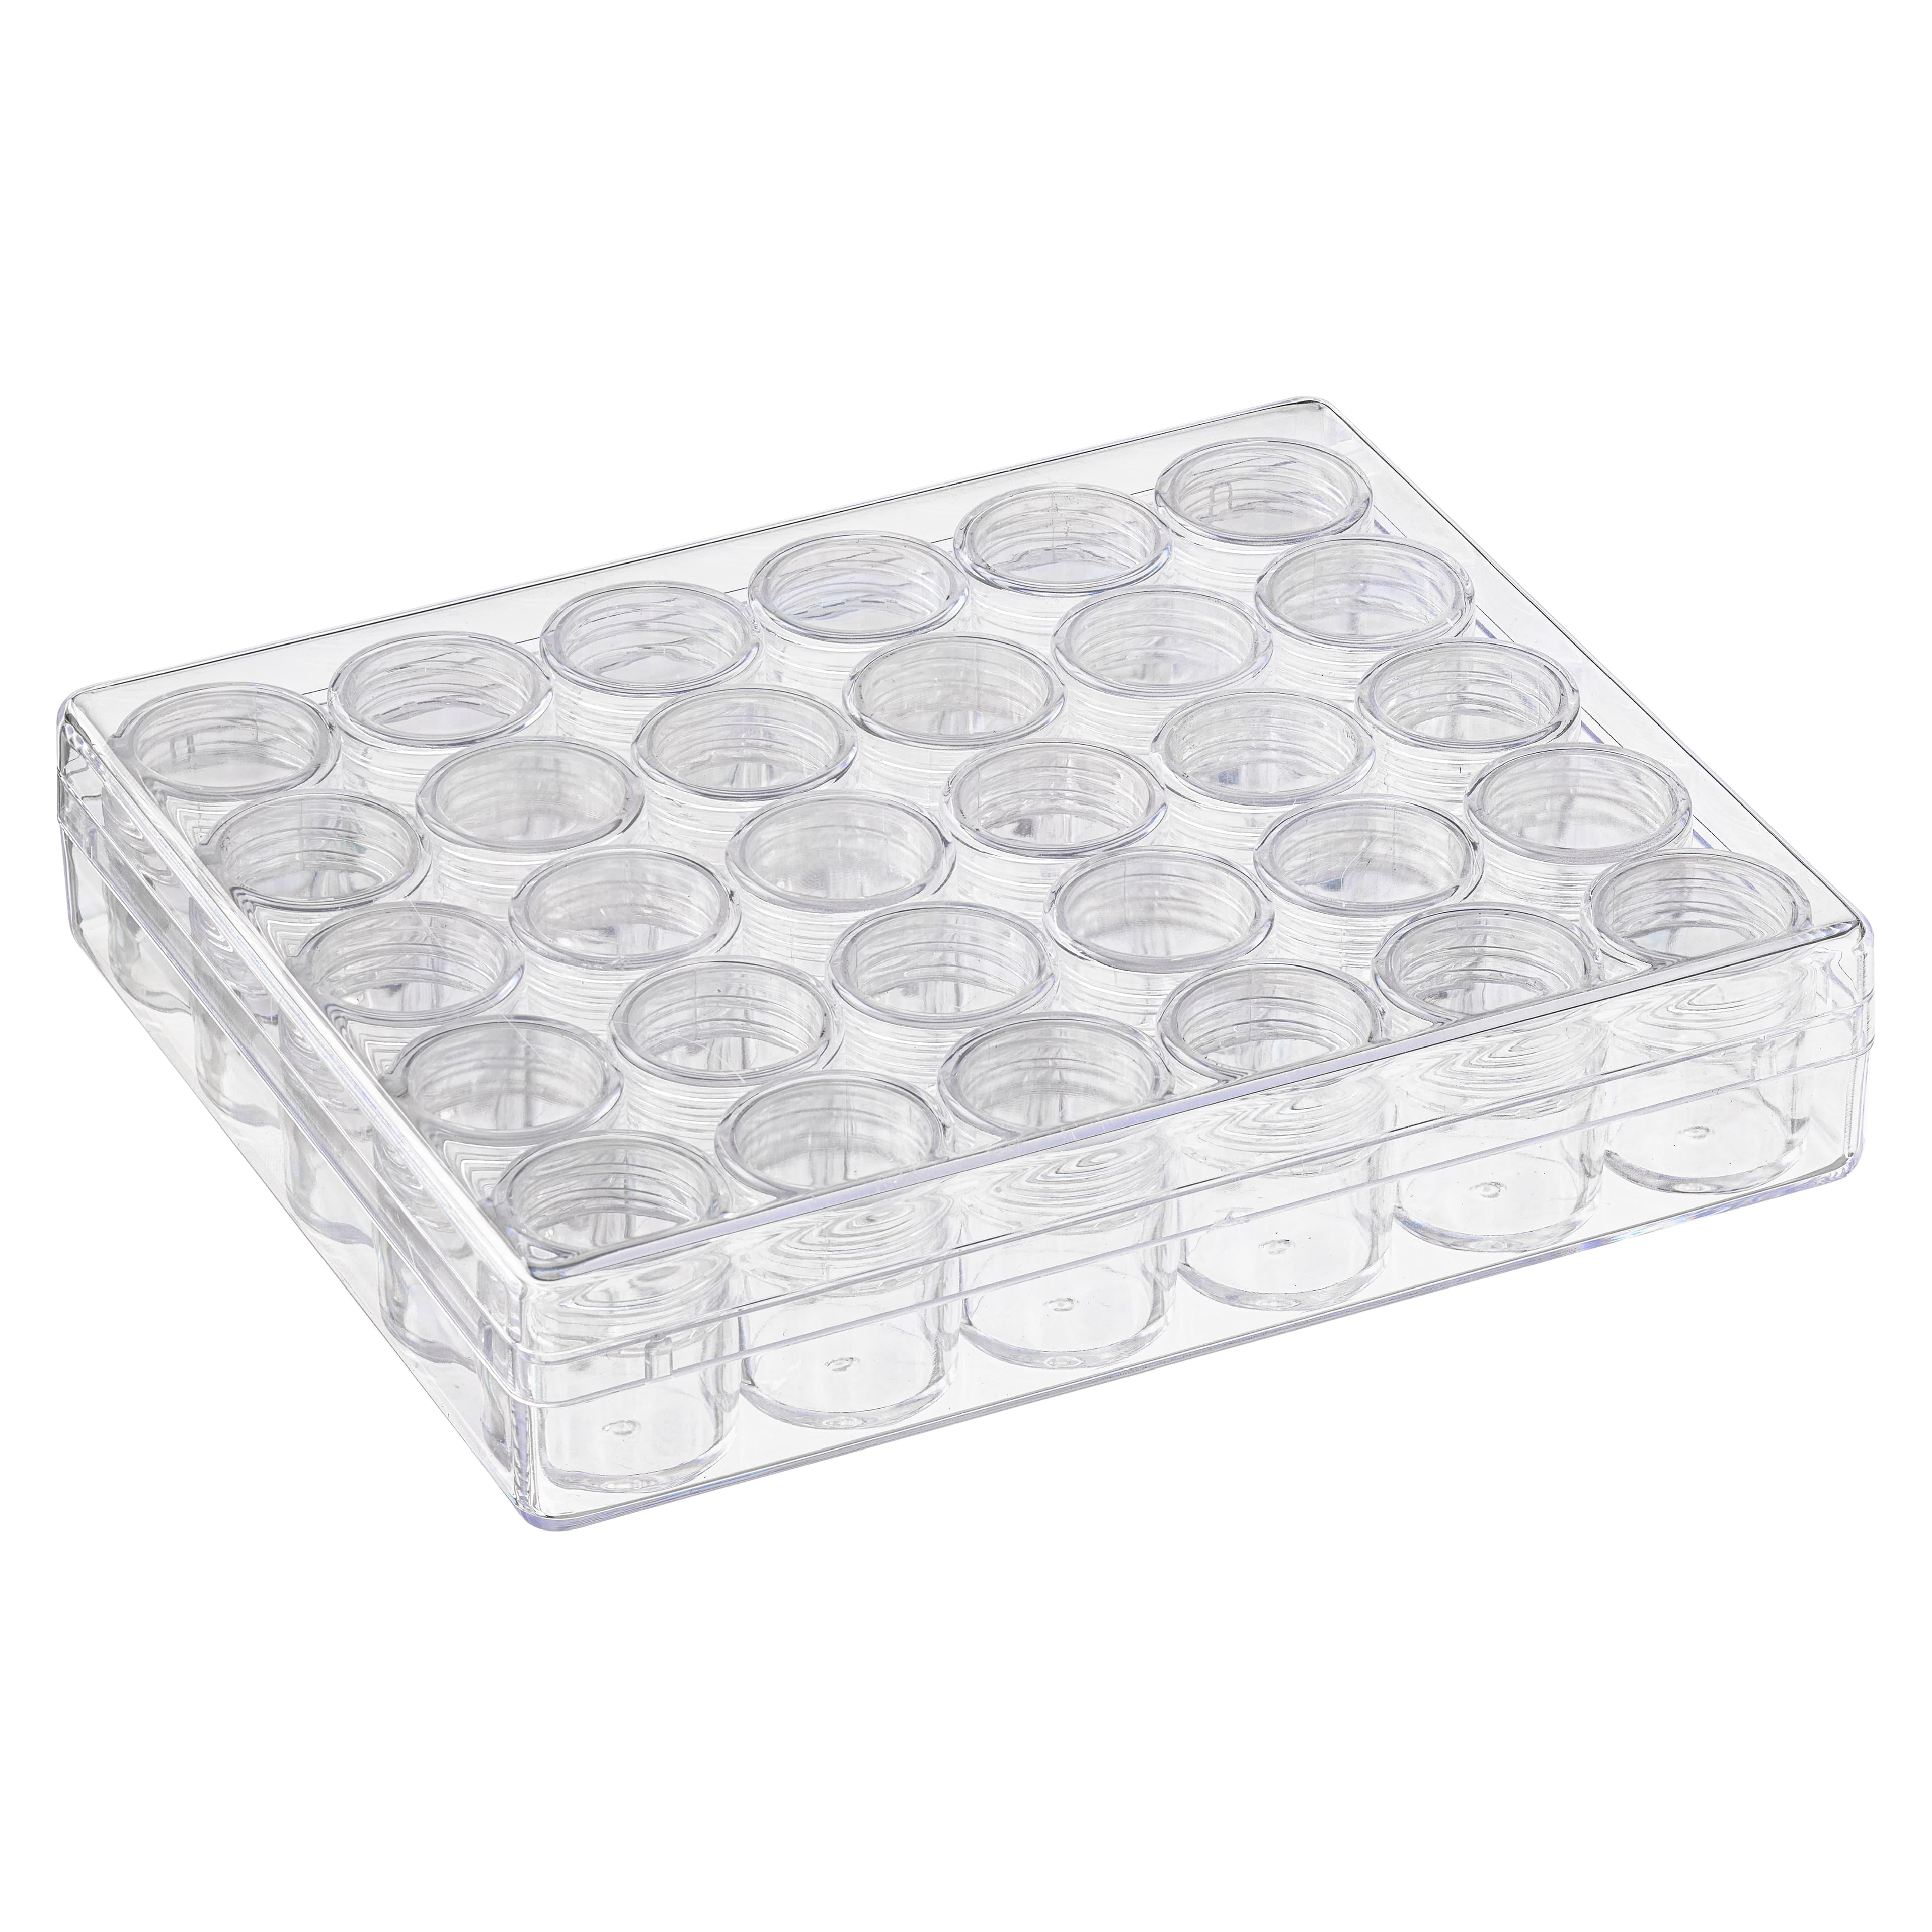 21816 Acrylic Storage Boxes with Lid Set with 30 Mini Plastic